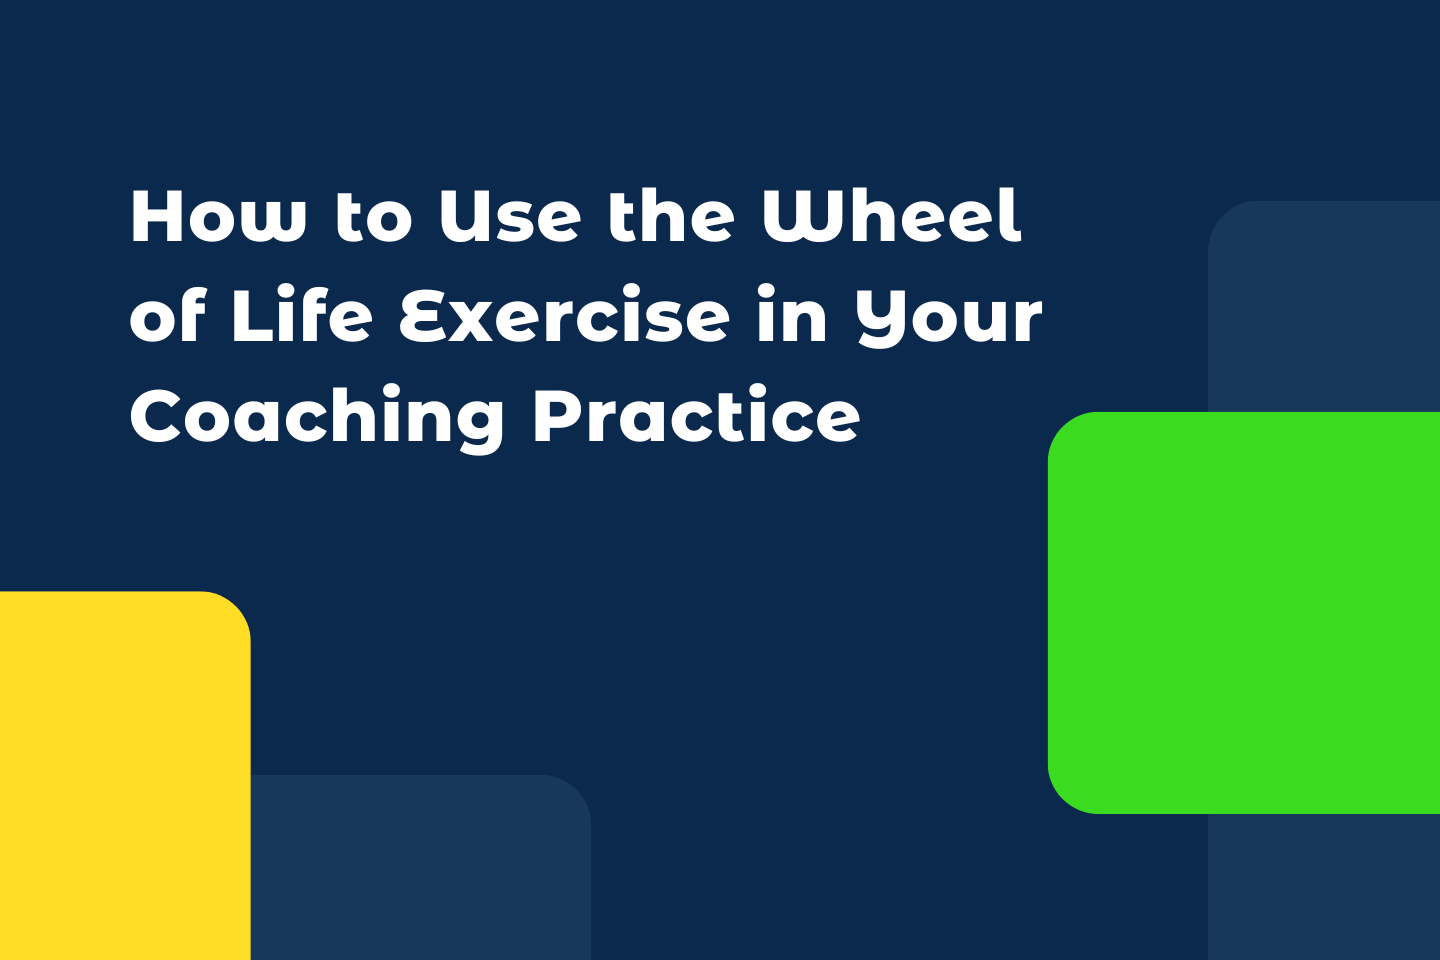 How to Use the Wheel of Life Exercise in Your Coaching Practice